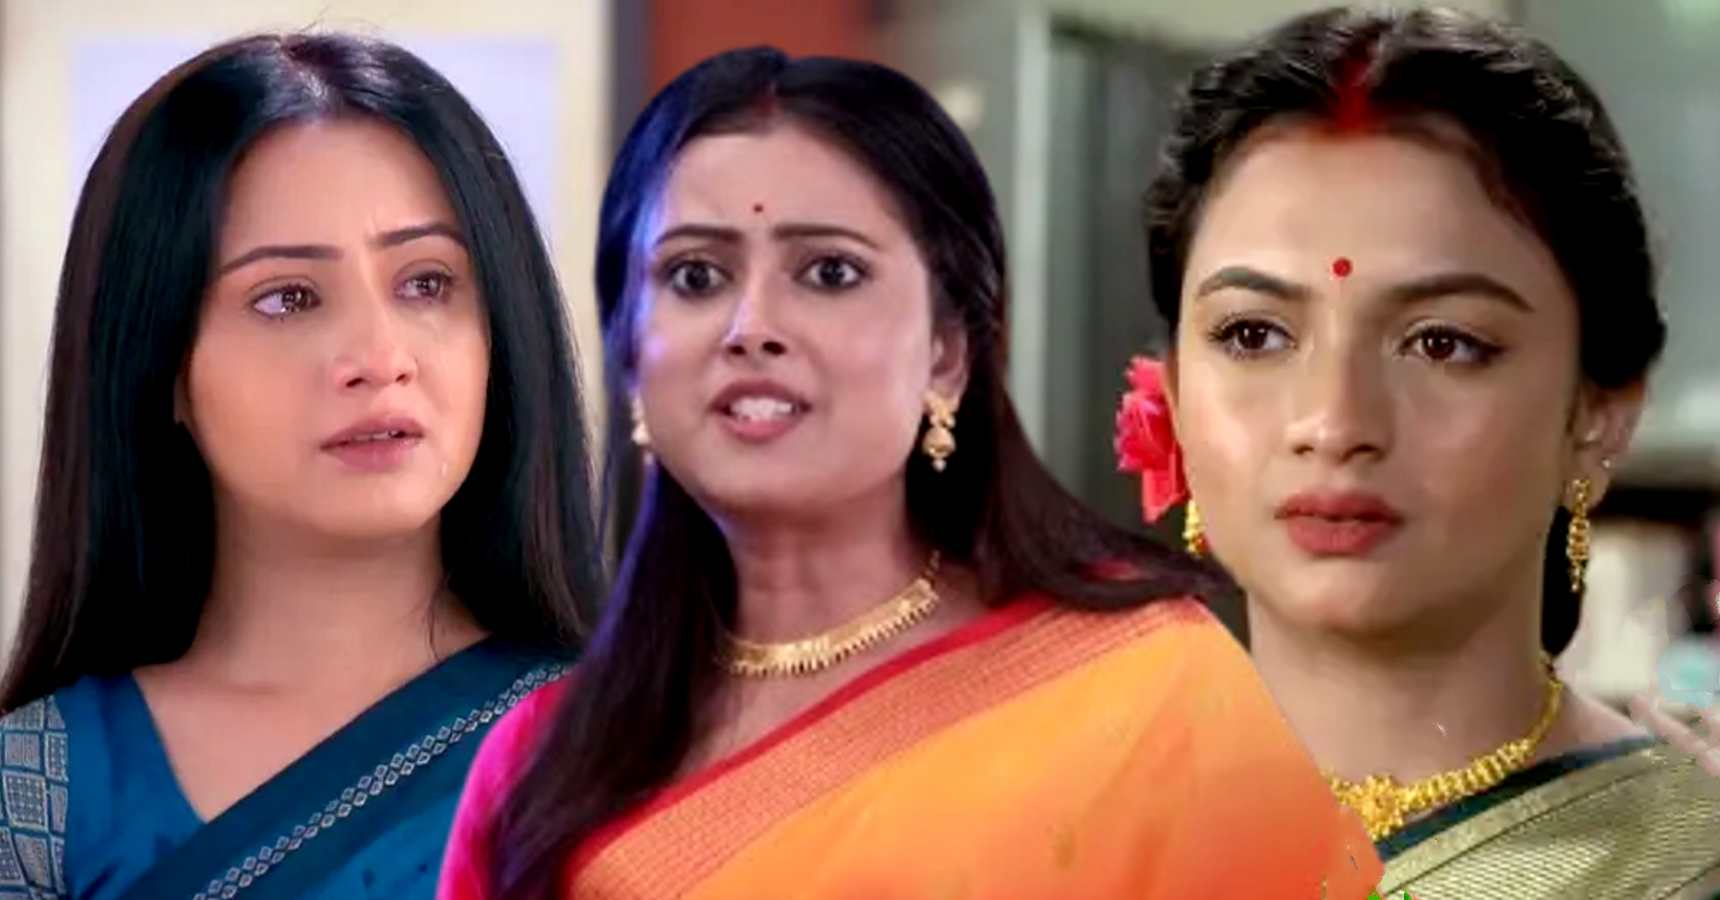 zee bangla this serial should end soon release upcoming serial's time slot